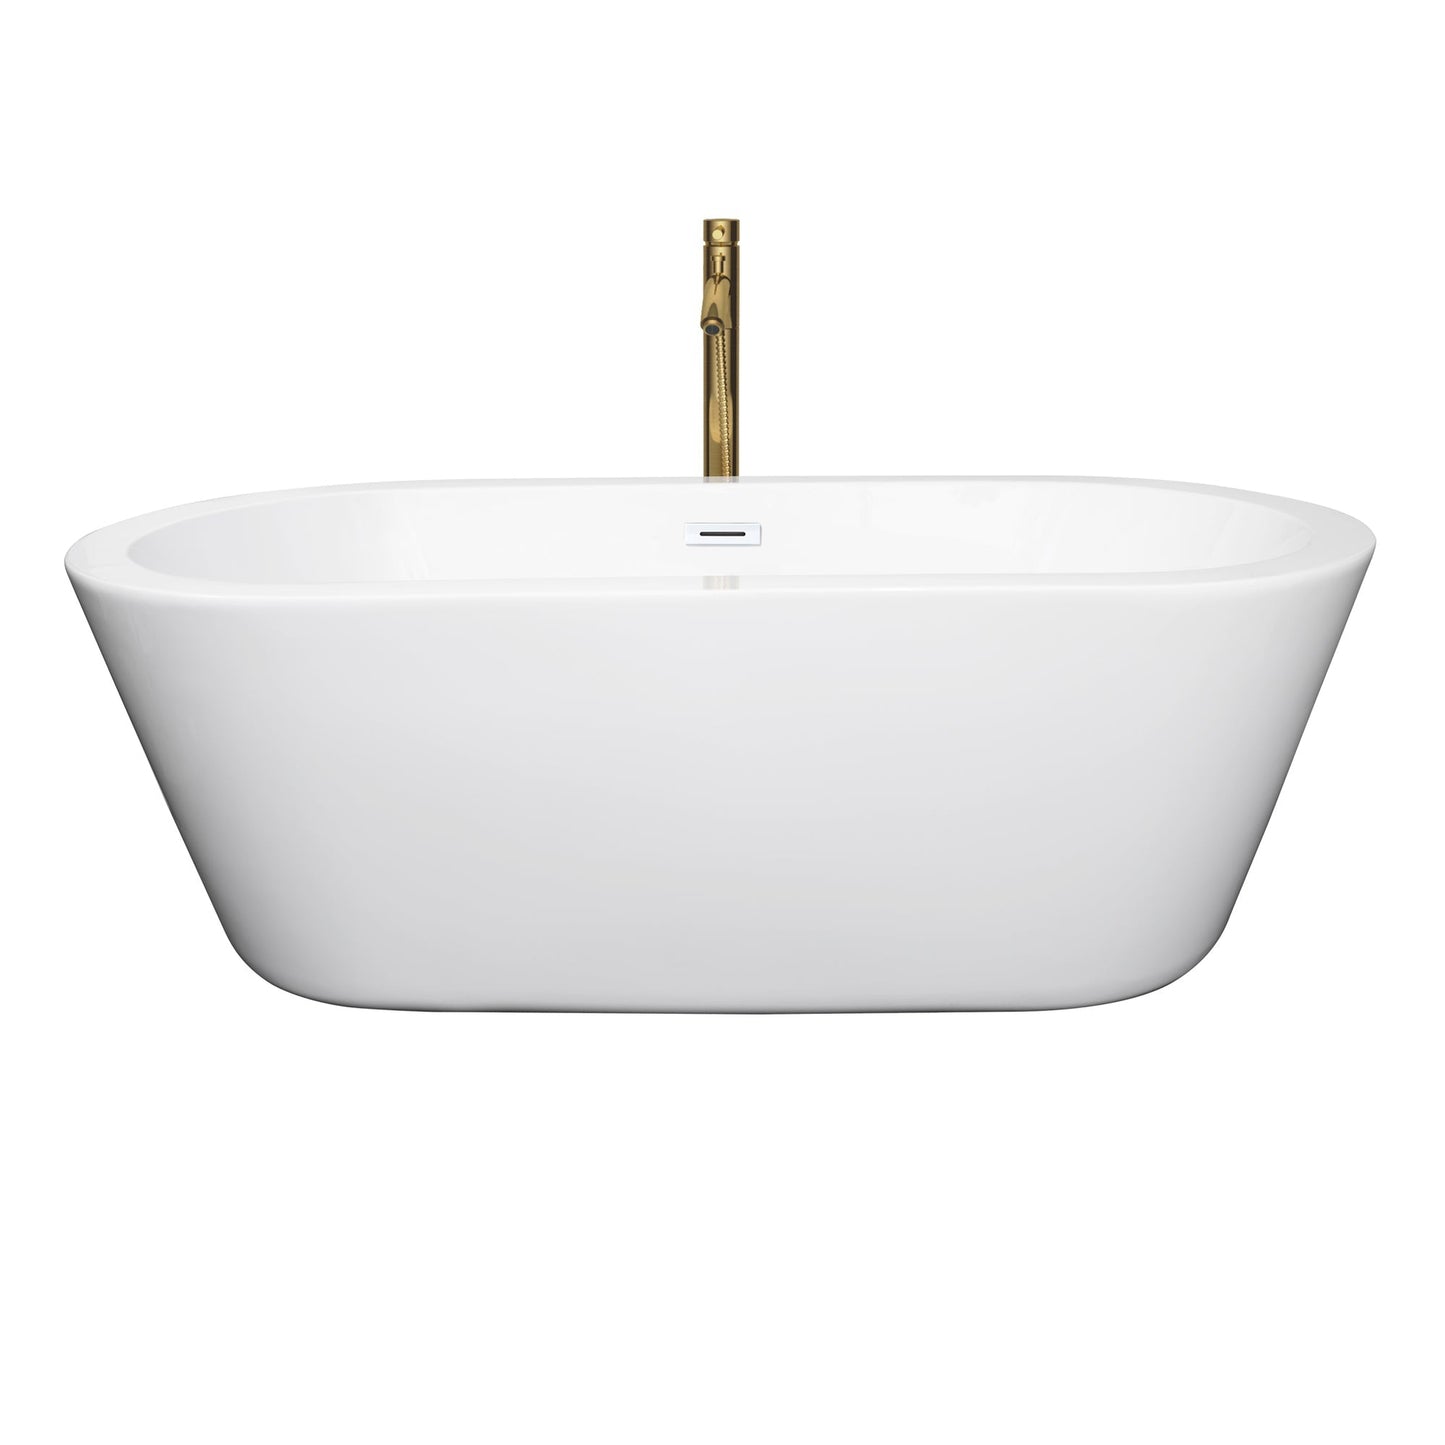 Wyndham Collection Mermaid 67" Freestanding Bathtub in White With Shiny White Trim and Floor Mounted Faucet in Brushed Gold